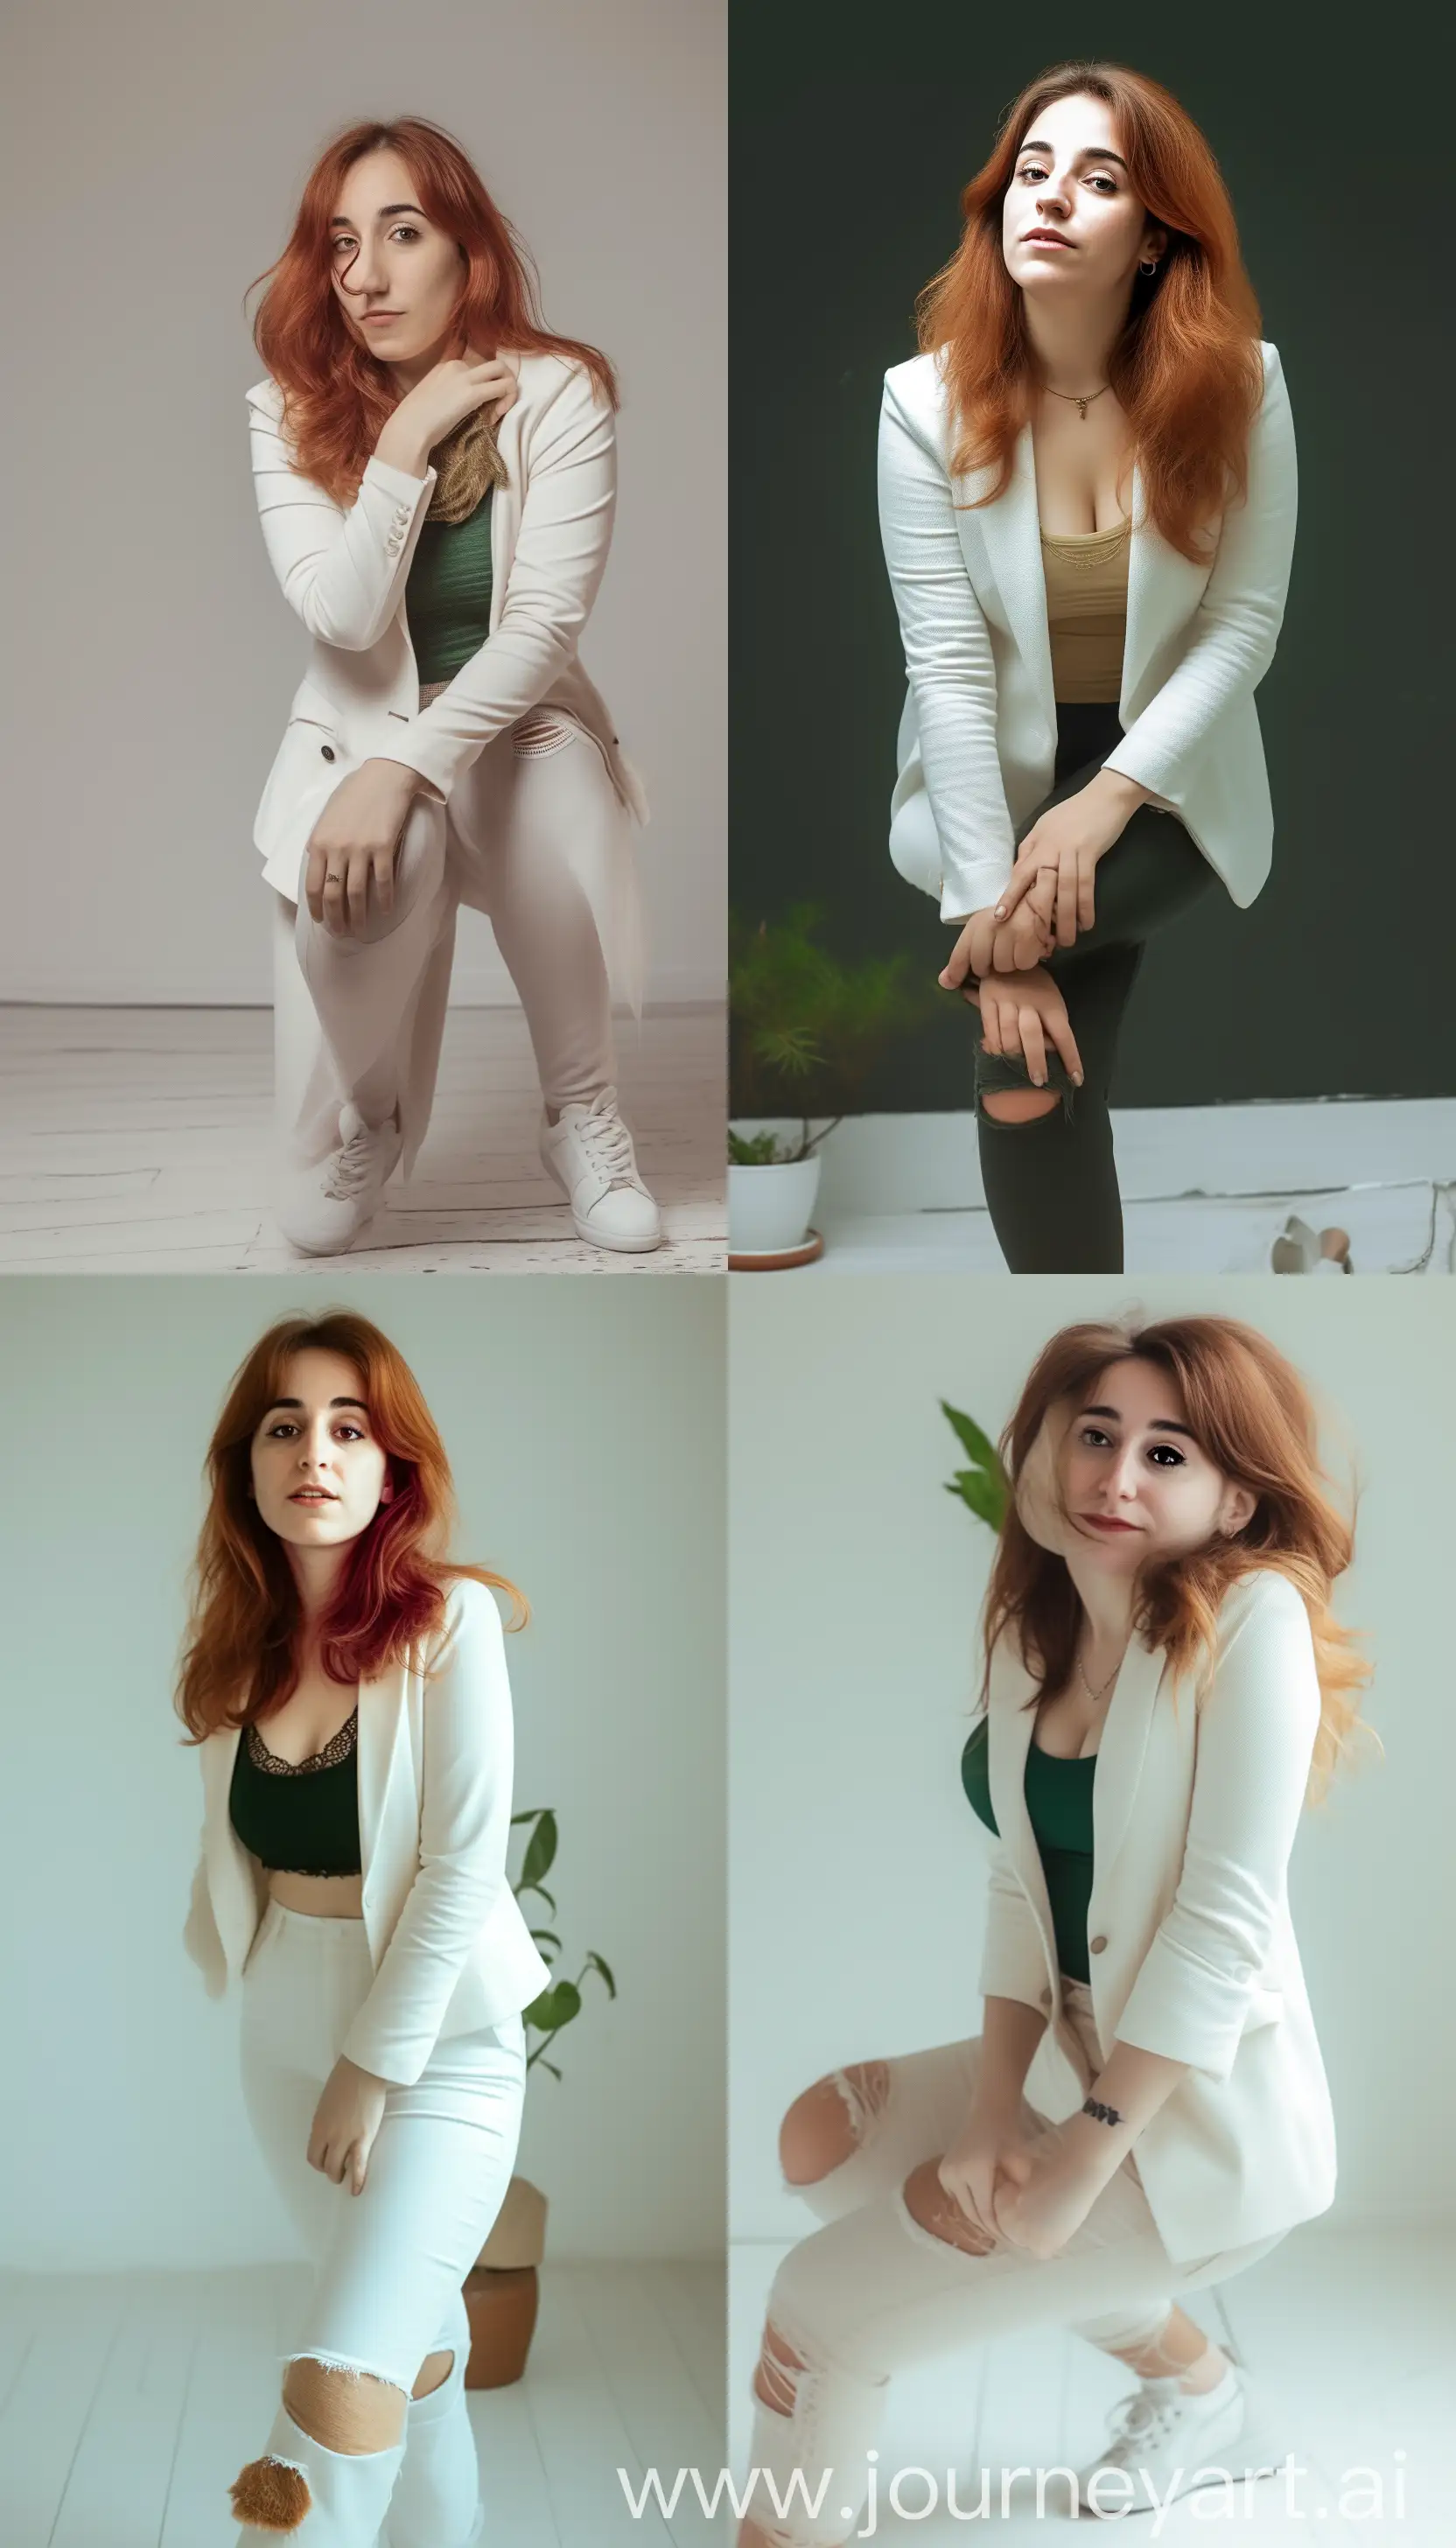 A full body stylish woman with medium-length hair and wearing white striking boss poses in a professional studio photoshoot, female blazer, white shoes  zoom out 2x, right side angle --cref https://cdn.discordapp.com/attachments/989268365870776411/1218985362832097330/ameliebois_a_woman_in_italian_restaurant_eyes_look_at_the_plate_7068afc0-b7dc-4170-bf50-c71ae689ce7c.png?ex=6609a796&is=65f73296&hm=1ad127f25081b929add499ce9c0a1396427f93cd4e3a8e0c0b3017a18955b4a2& --cw 100 --style raw --v  6 --ar 4:7 --q .25